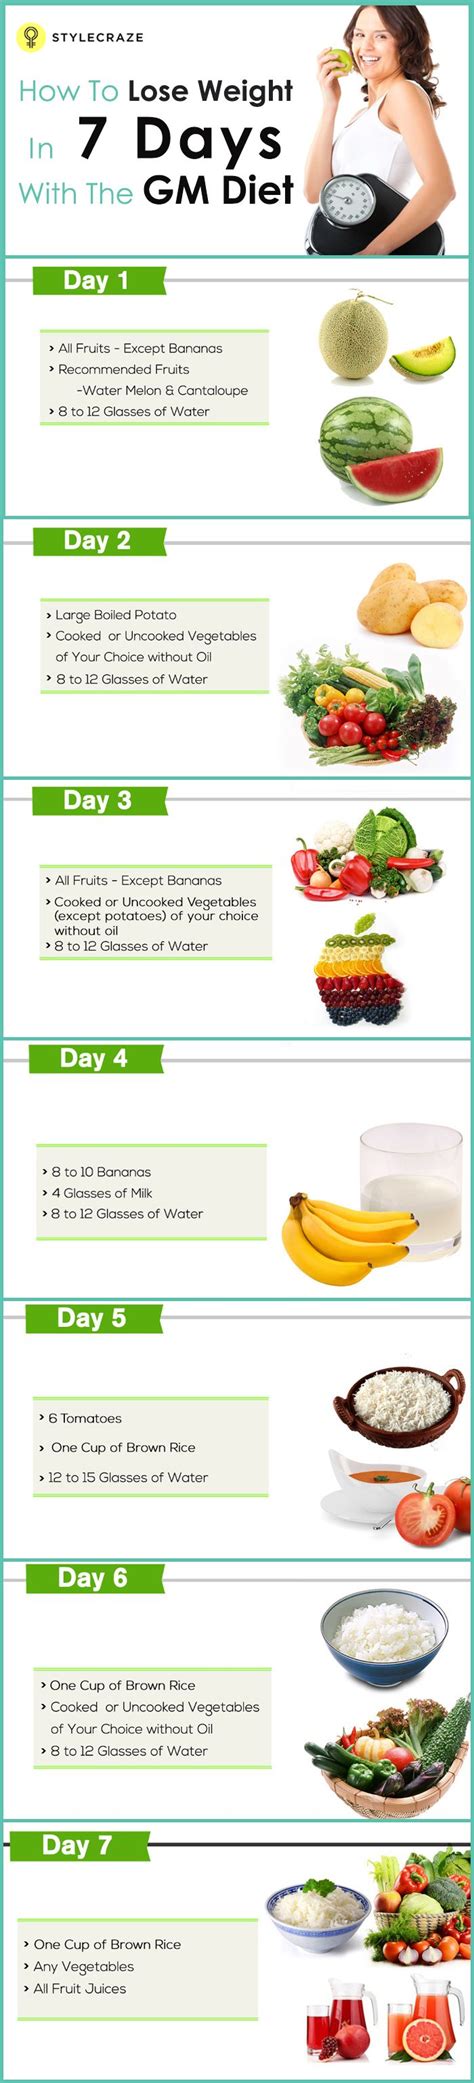 The Gm Diet Plan How To Lose Weight In Just 7 Days Weight Plans Diet